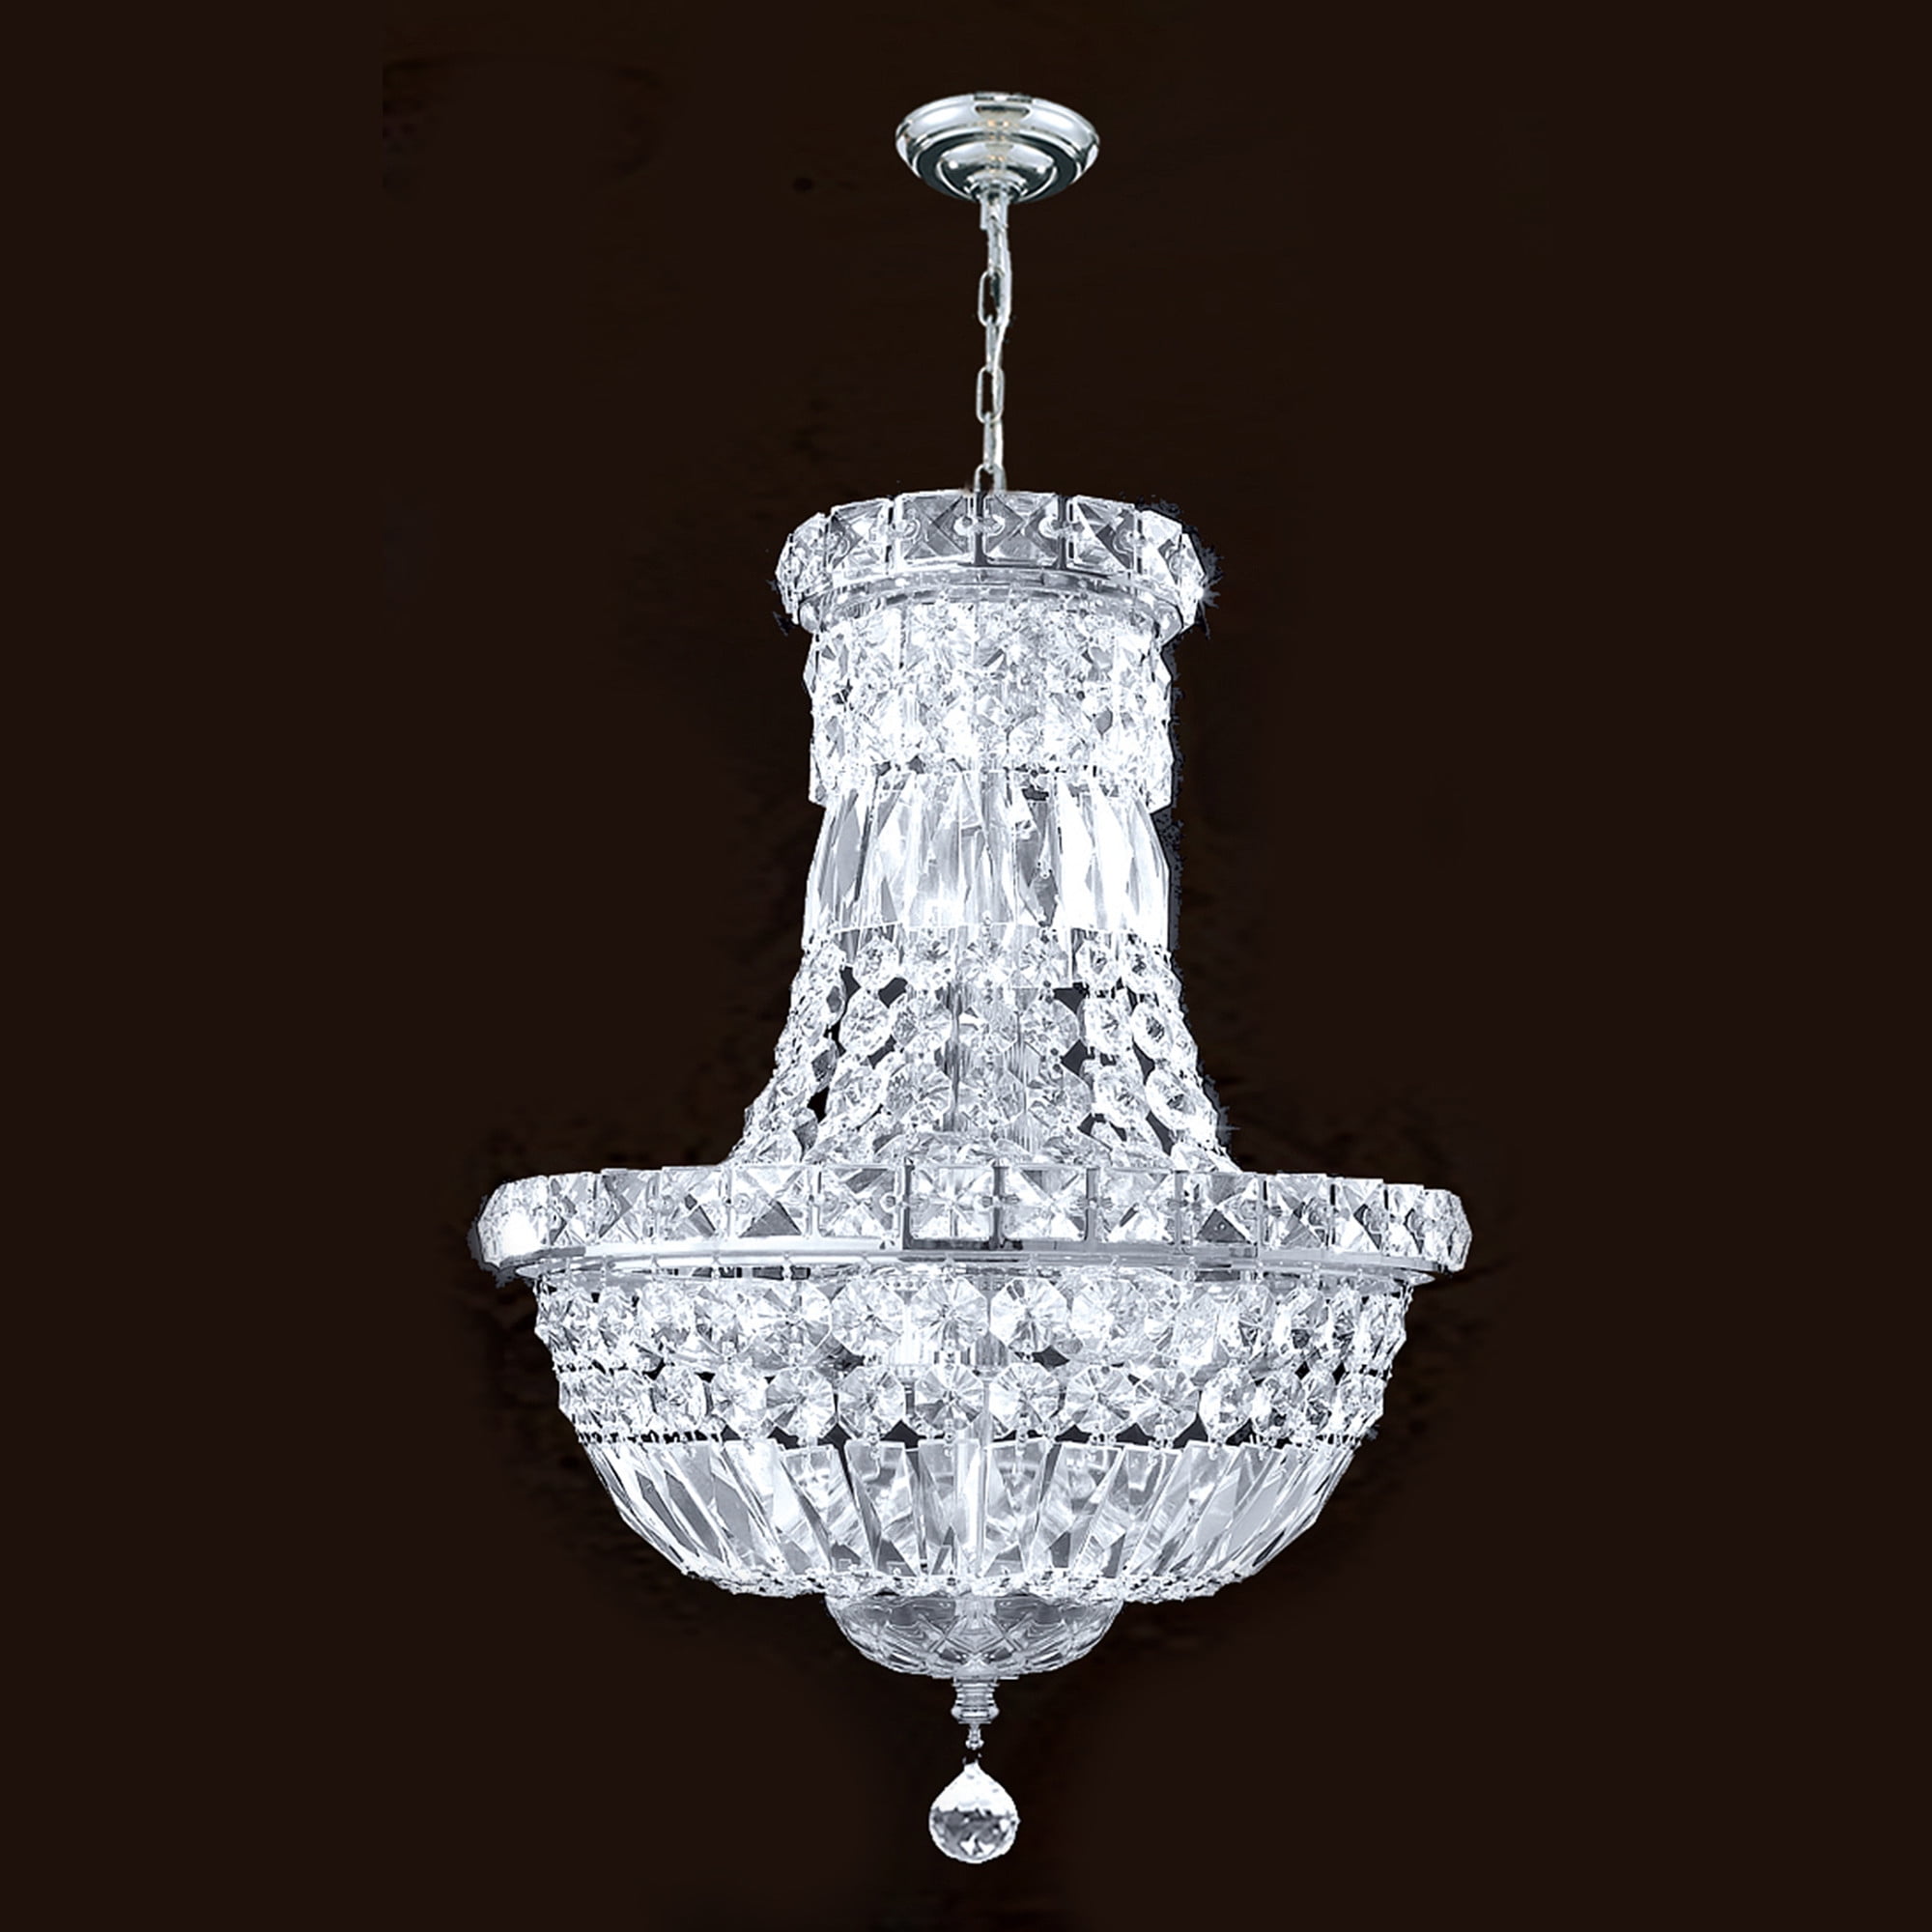 Empire Collection 6 Light Chrome Finish Crystal Chandelier 12